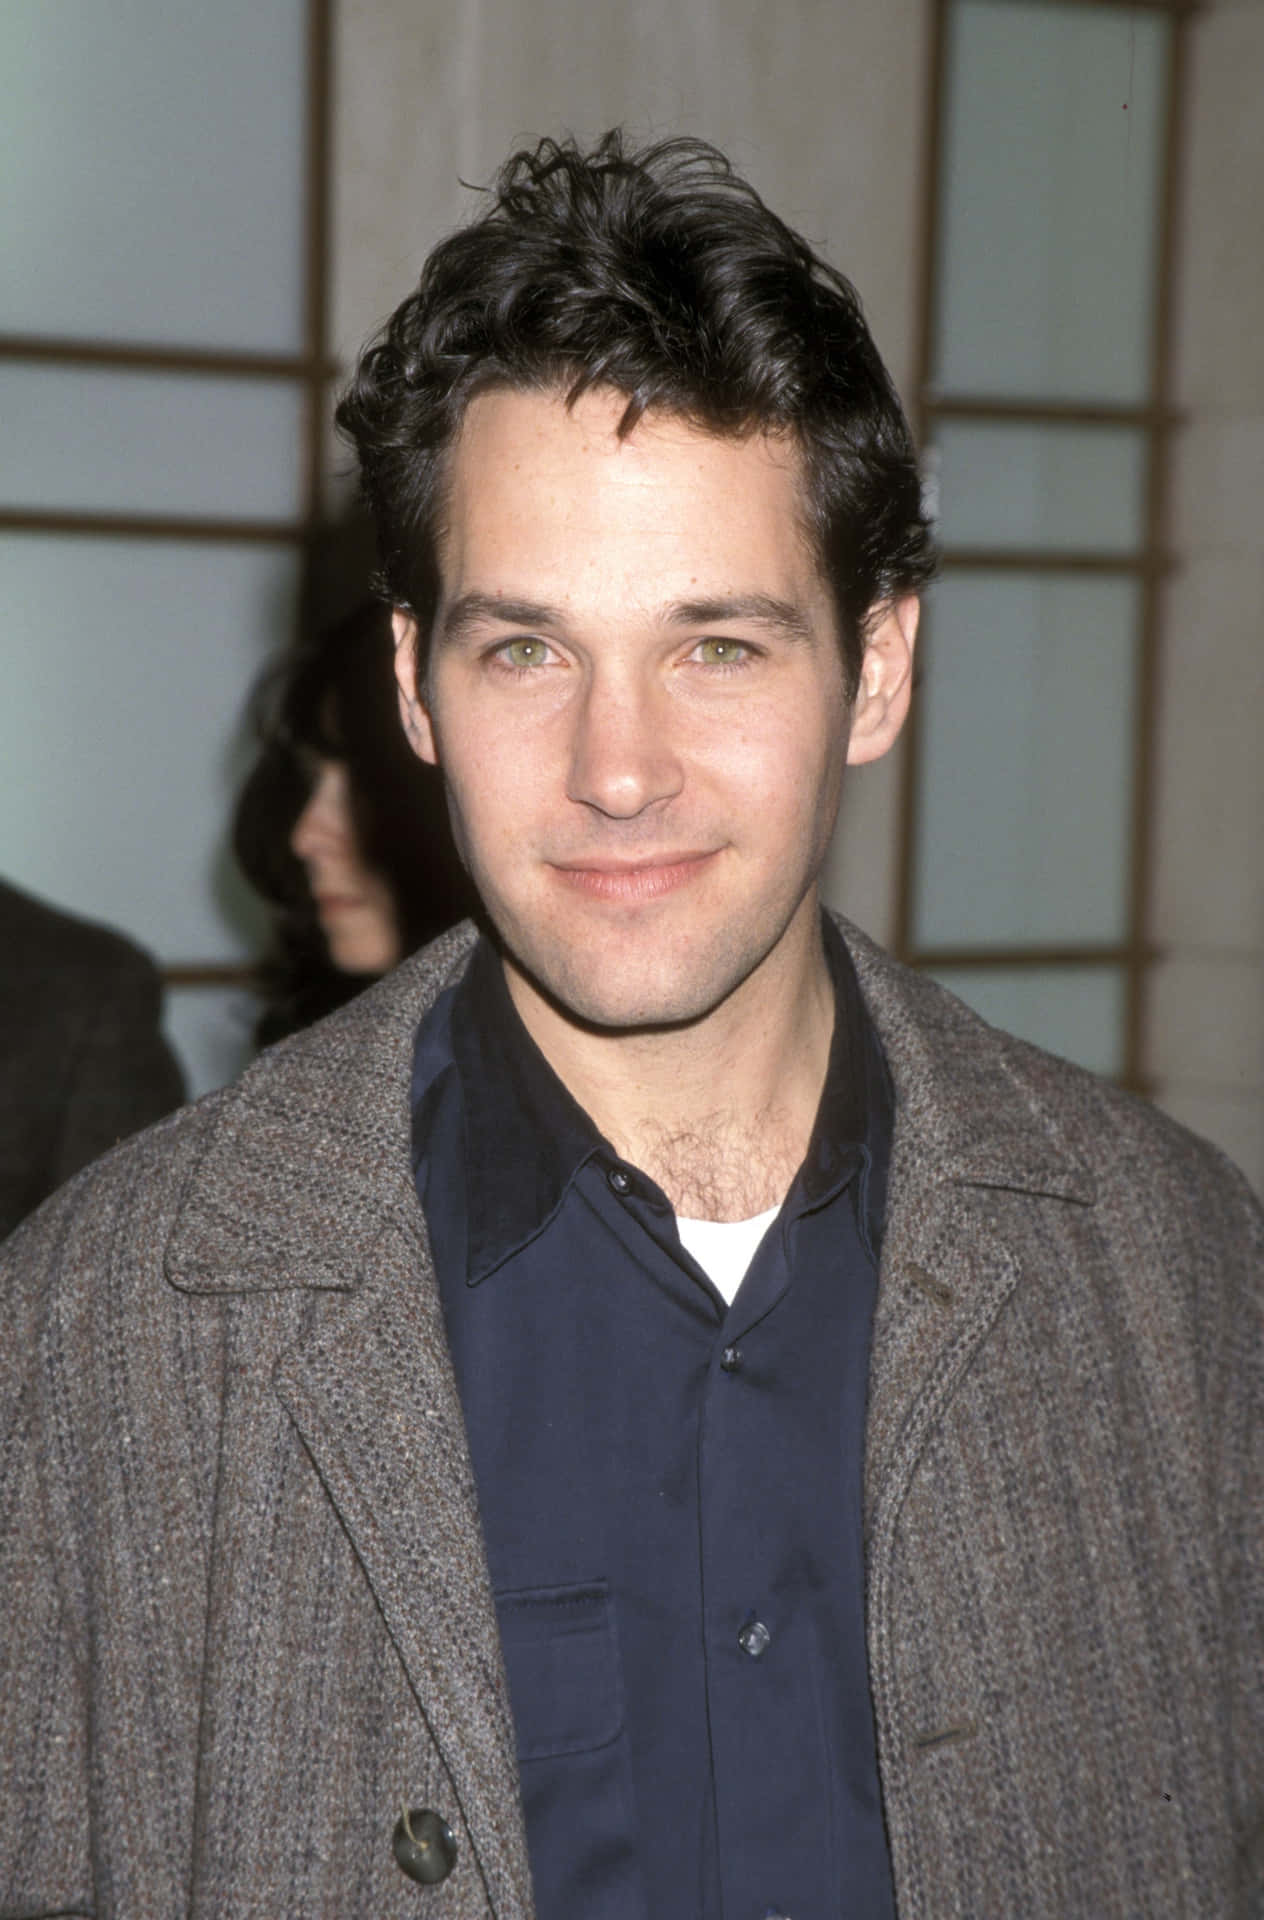 Actor Paul Rudd poses for the camera. Wallpaper